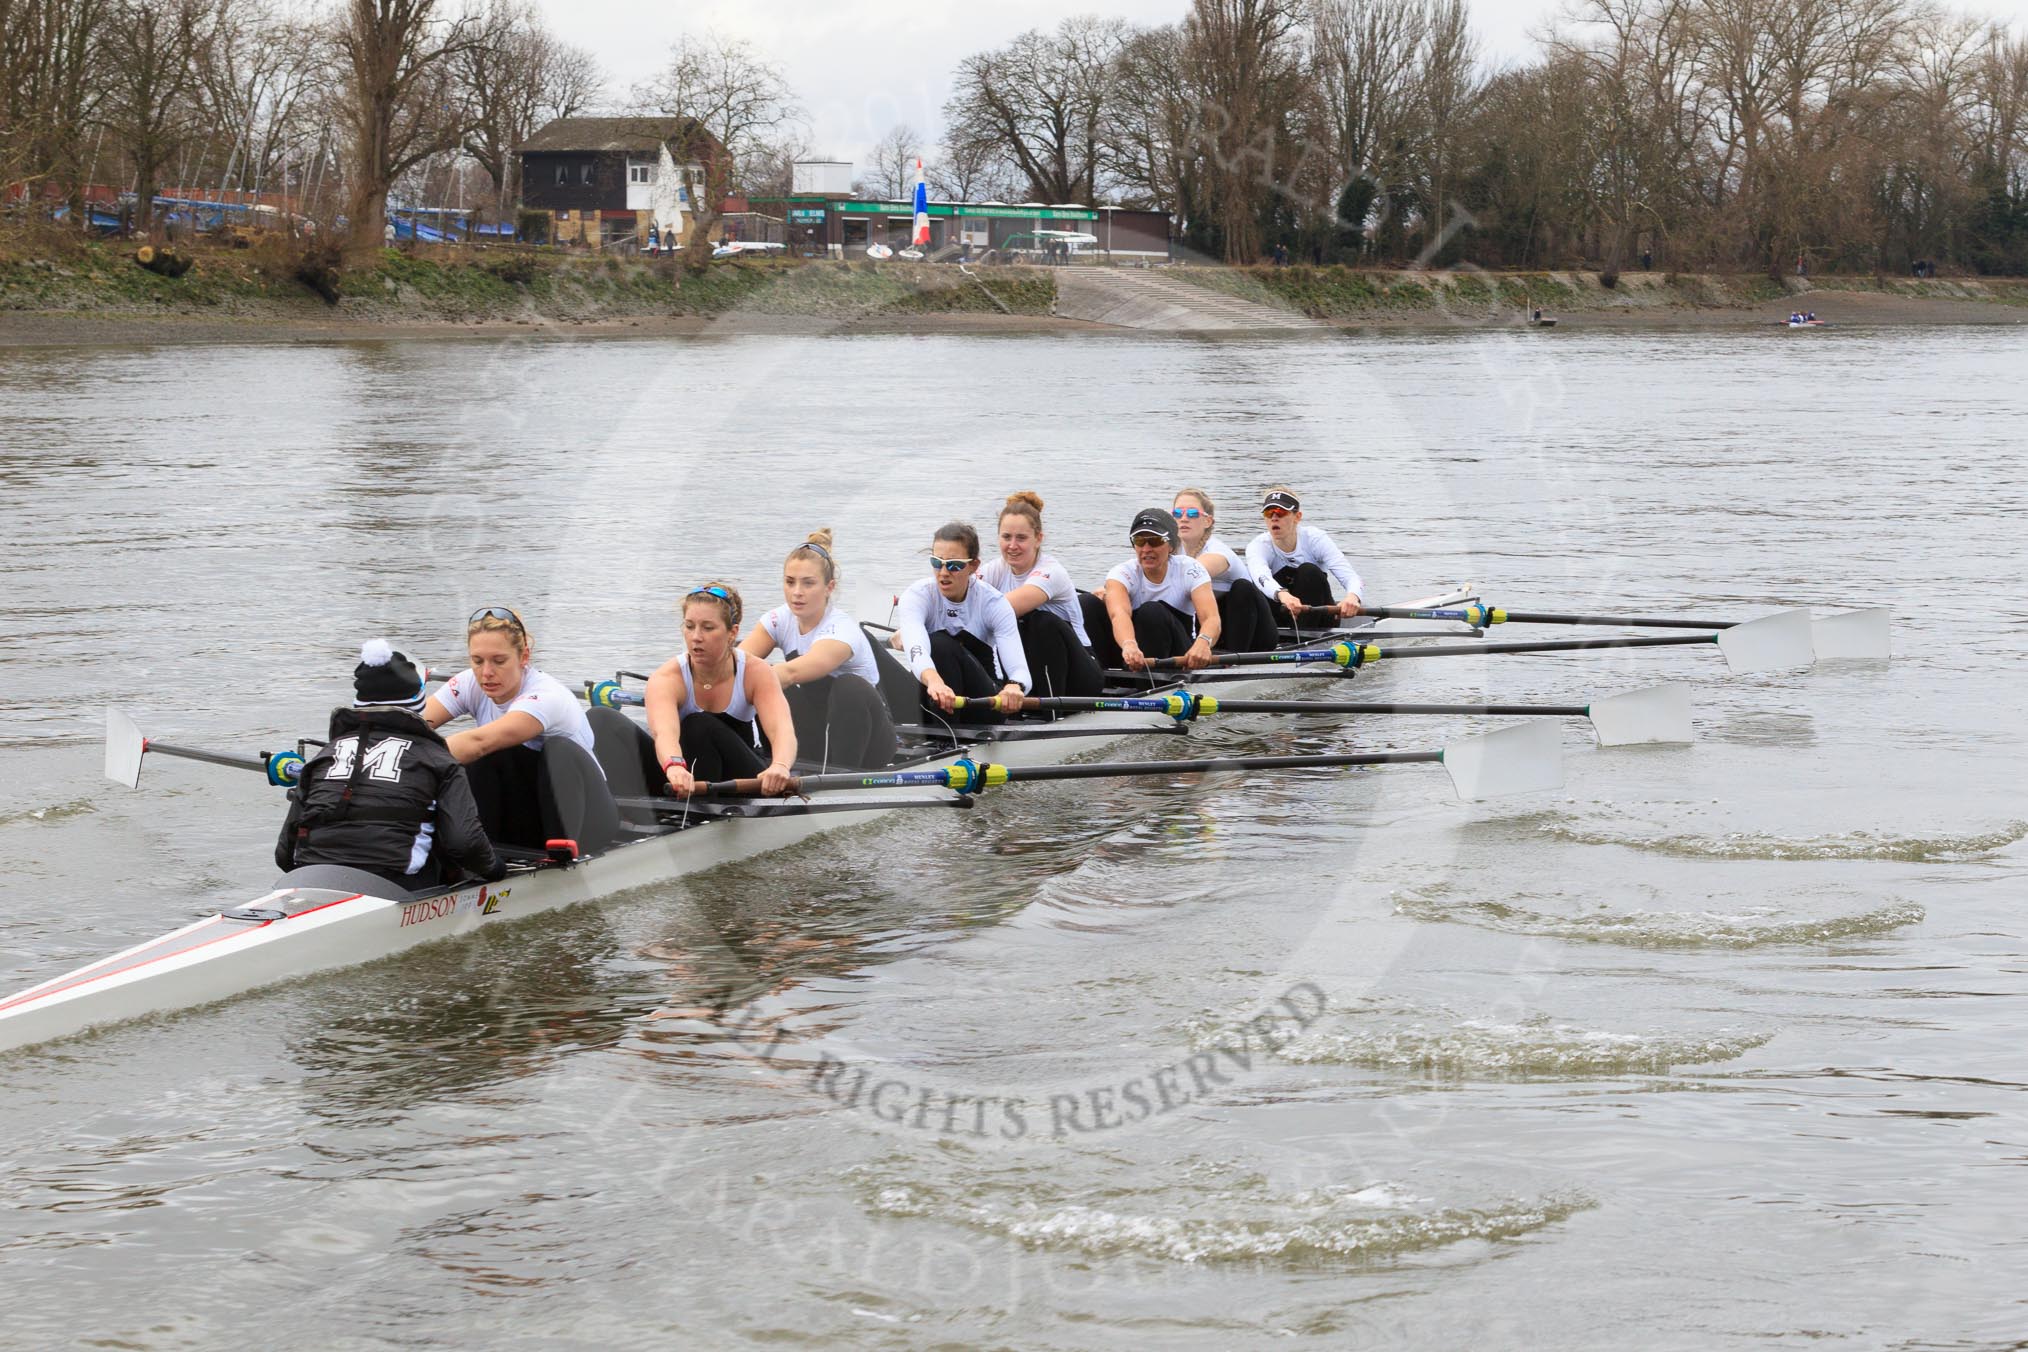 The Women's Boat Race season 2018 - fixture OUWBC vs. Molesey BC: Molesey falling a bit behind: Cox Ella Taylor, stroke Katie Bartlett, 7 Emma McDonald, 6 Molly Harding, 5 Ruth Whyman, 4 Claire McKeown, 3 Gabby Rodriguez, 2 Lucy Primmer, bow Emma Boyns.
River Thames between Putney Bridge and Mortlake,
London SW15,

United Kingdom,
on 04 March 2018 at 13:46, image #61